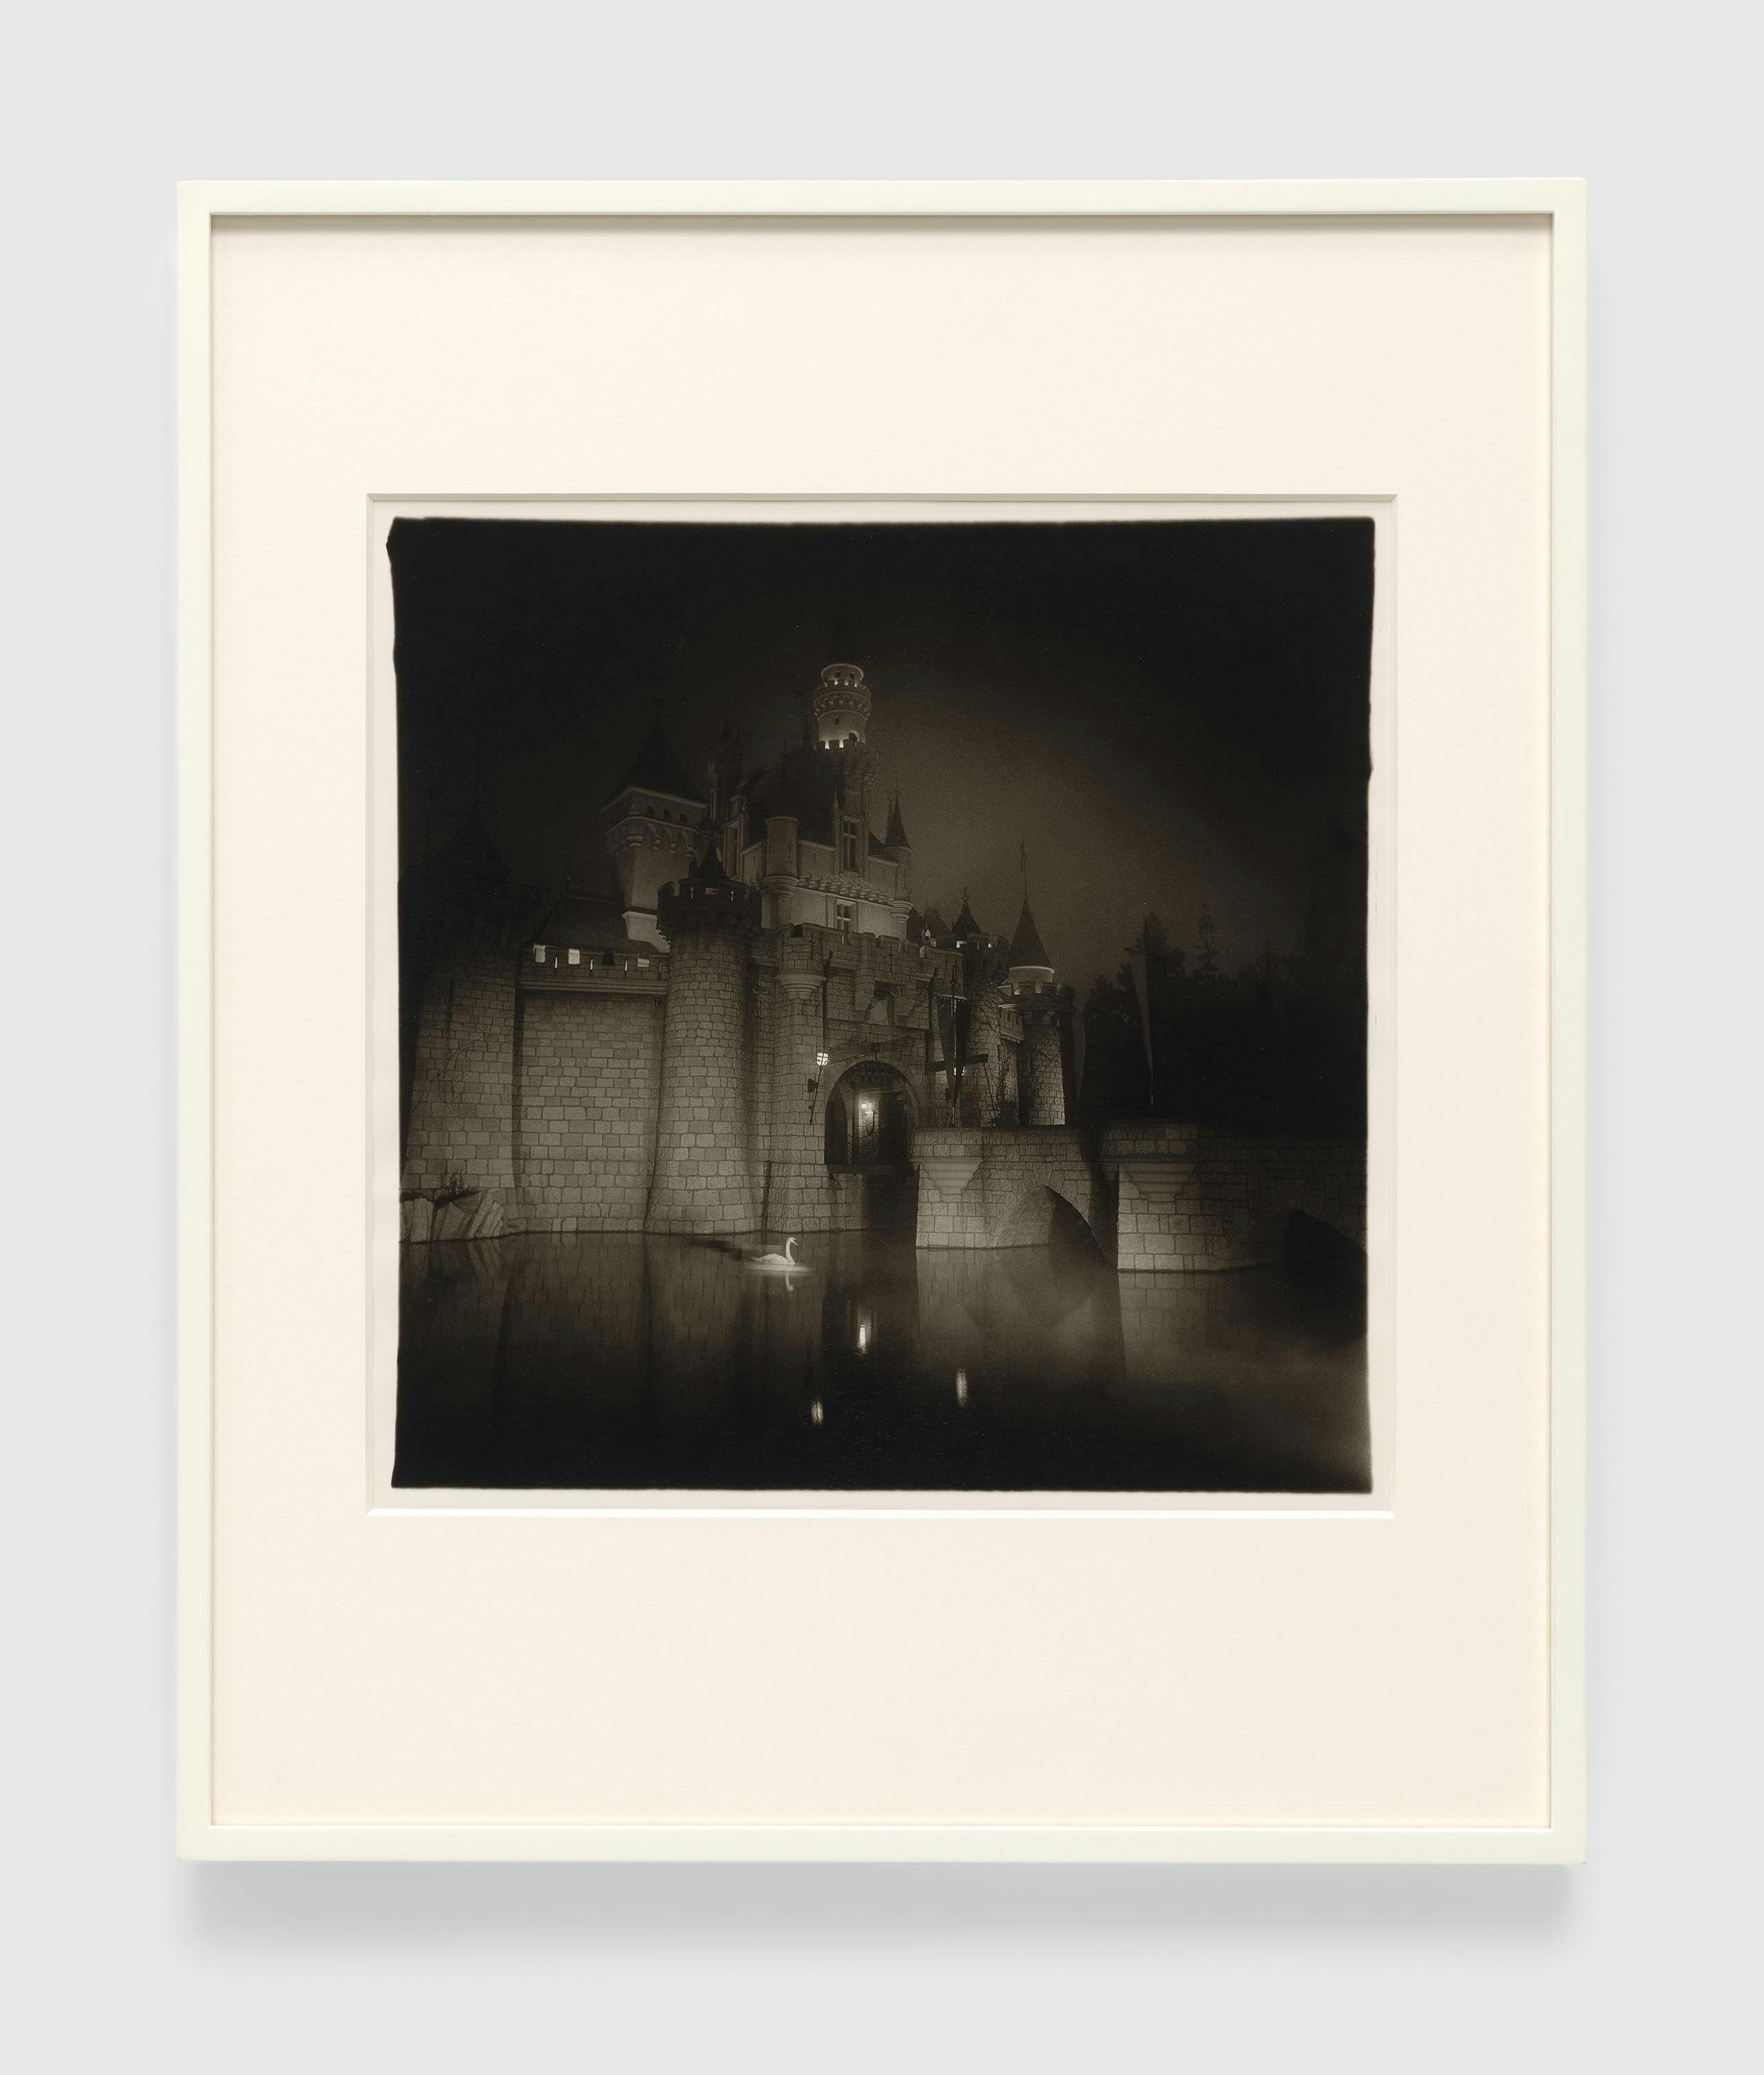 A gelatin silver print by Diane Arbus, titled A castle in Disneyland, Cal. 1962, dated 1962.